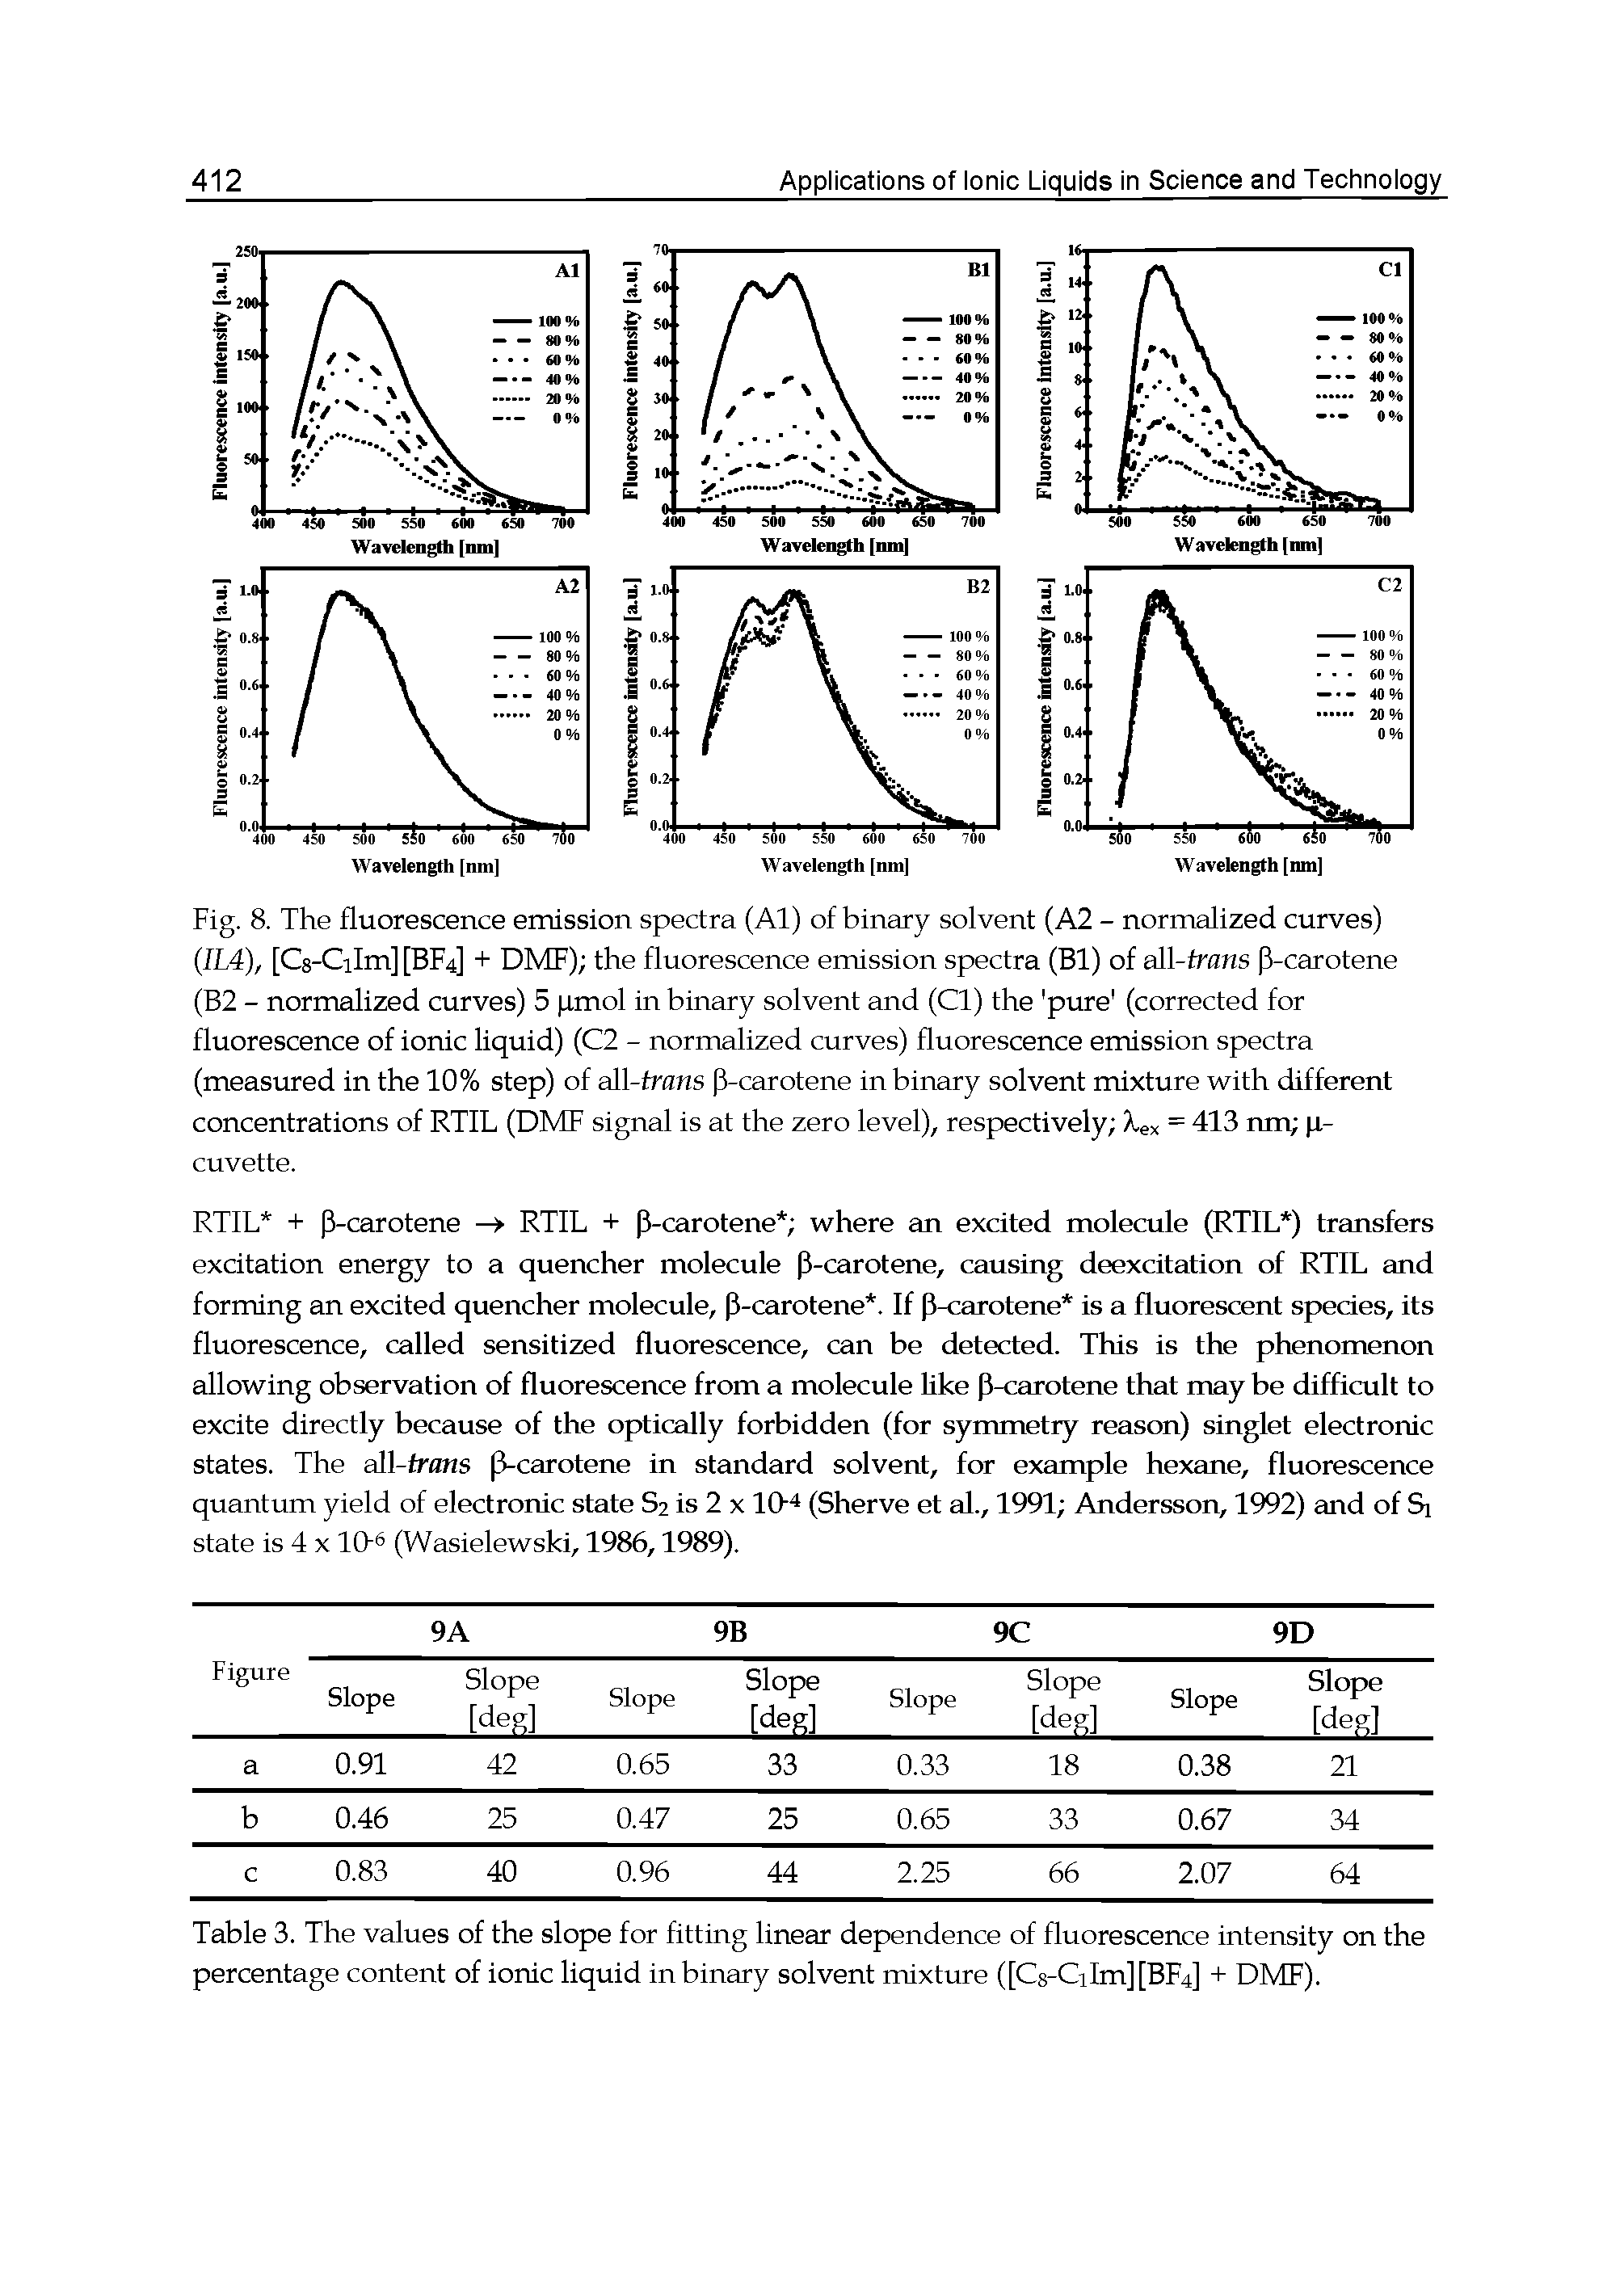 Fig. 8. The fluorescence emission spectra (Al) of binary solvent (A2 - normalized curves) (IL4), [Cs-Cilm] [BF4] + DMF) the fluorescence emission spectra (Bl) of all-frfl s P-carotene (B2 - normalized curves) 5 pmol in binary solvent and (Cl) the pure (corrected for fluorescence of ionic liquid) (C2 - normalized curves) fluorescence emission spectra (measured in the 10% step) of all-trans P-carotene in binary solvent mixture with different concentrations of RTIL (DMF signal is at the zero level), respectively X.ex = 413 ntn p.-cuvette.